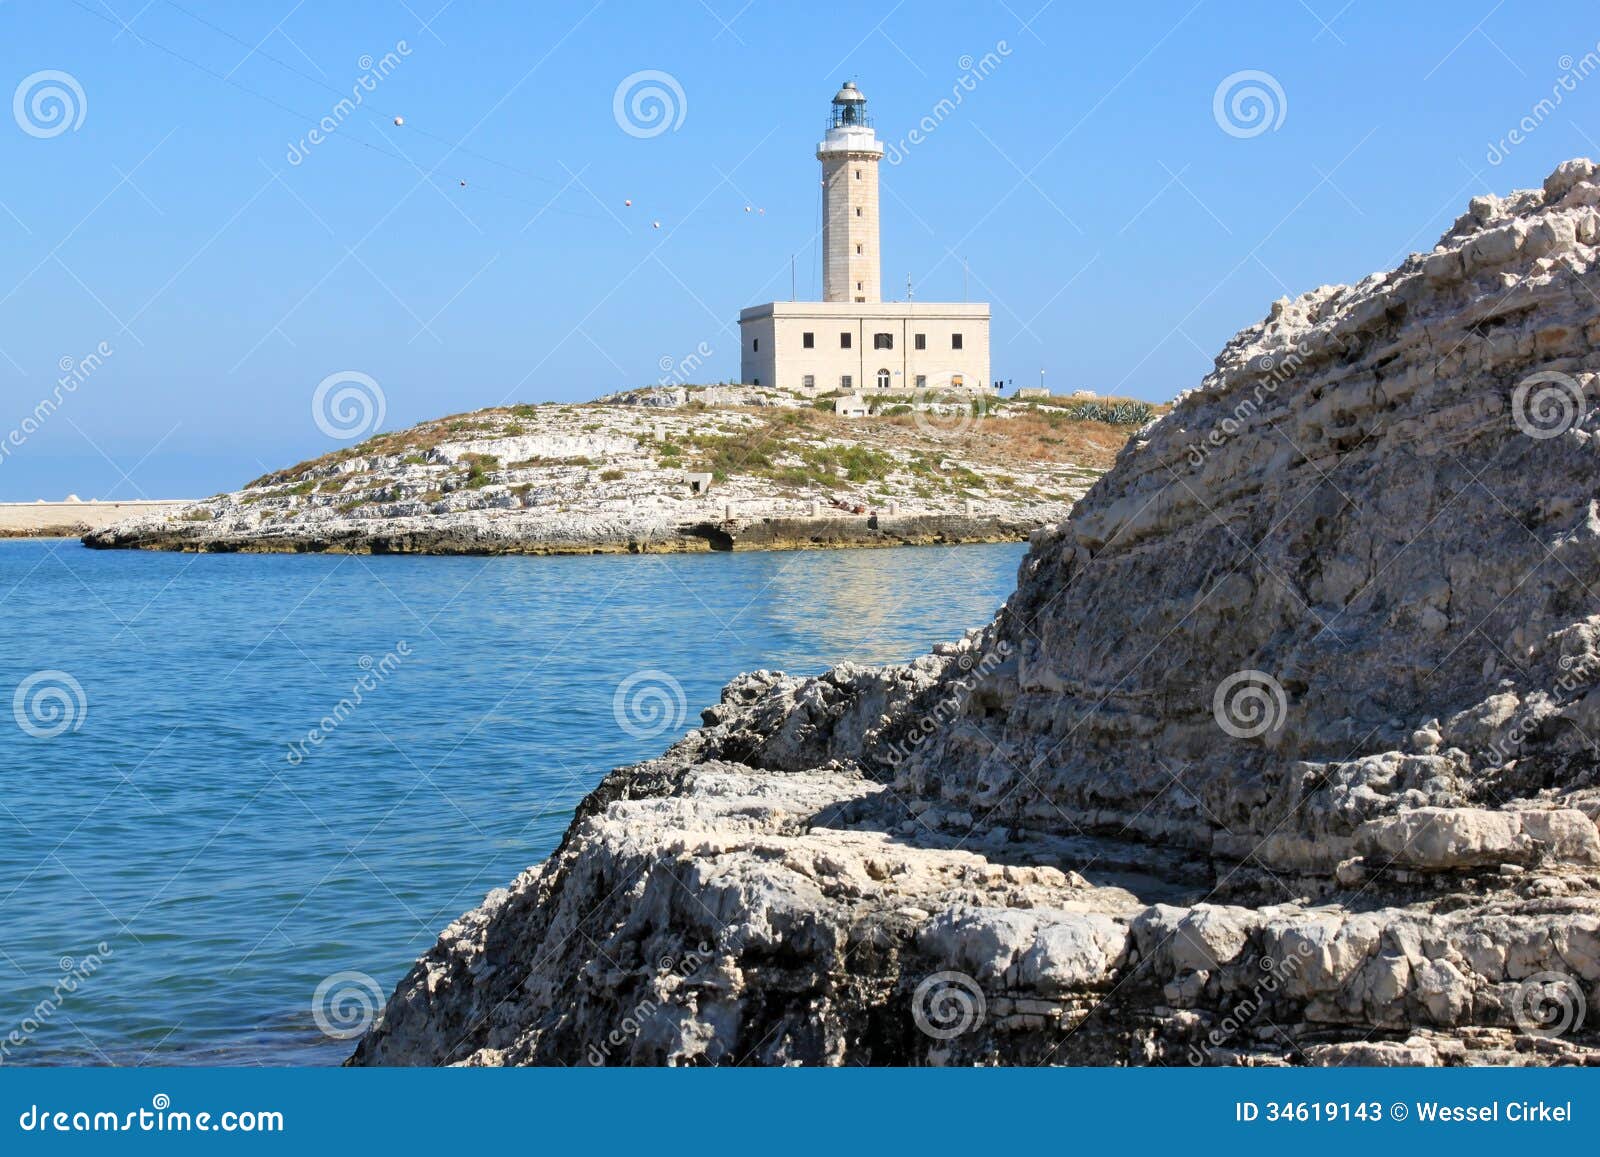 vieste lighthouse in the adriatic sea, italy